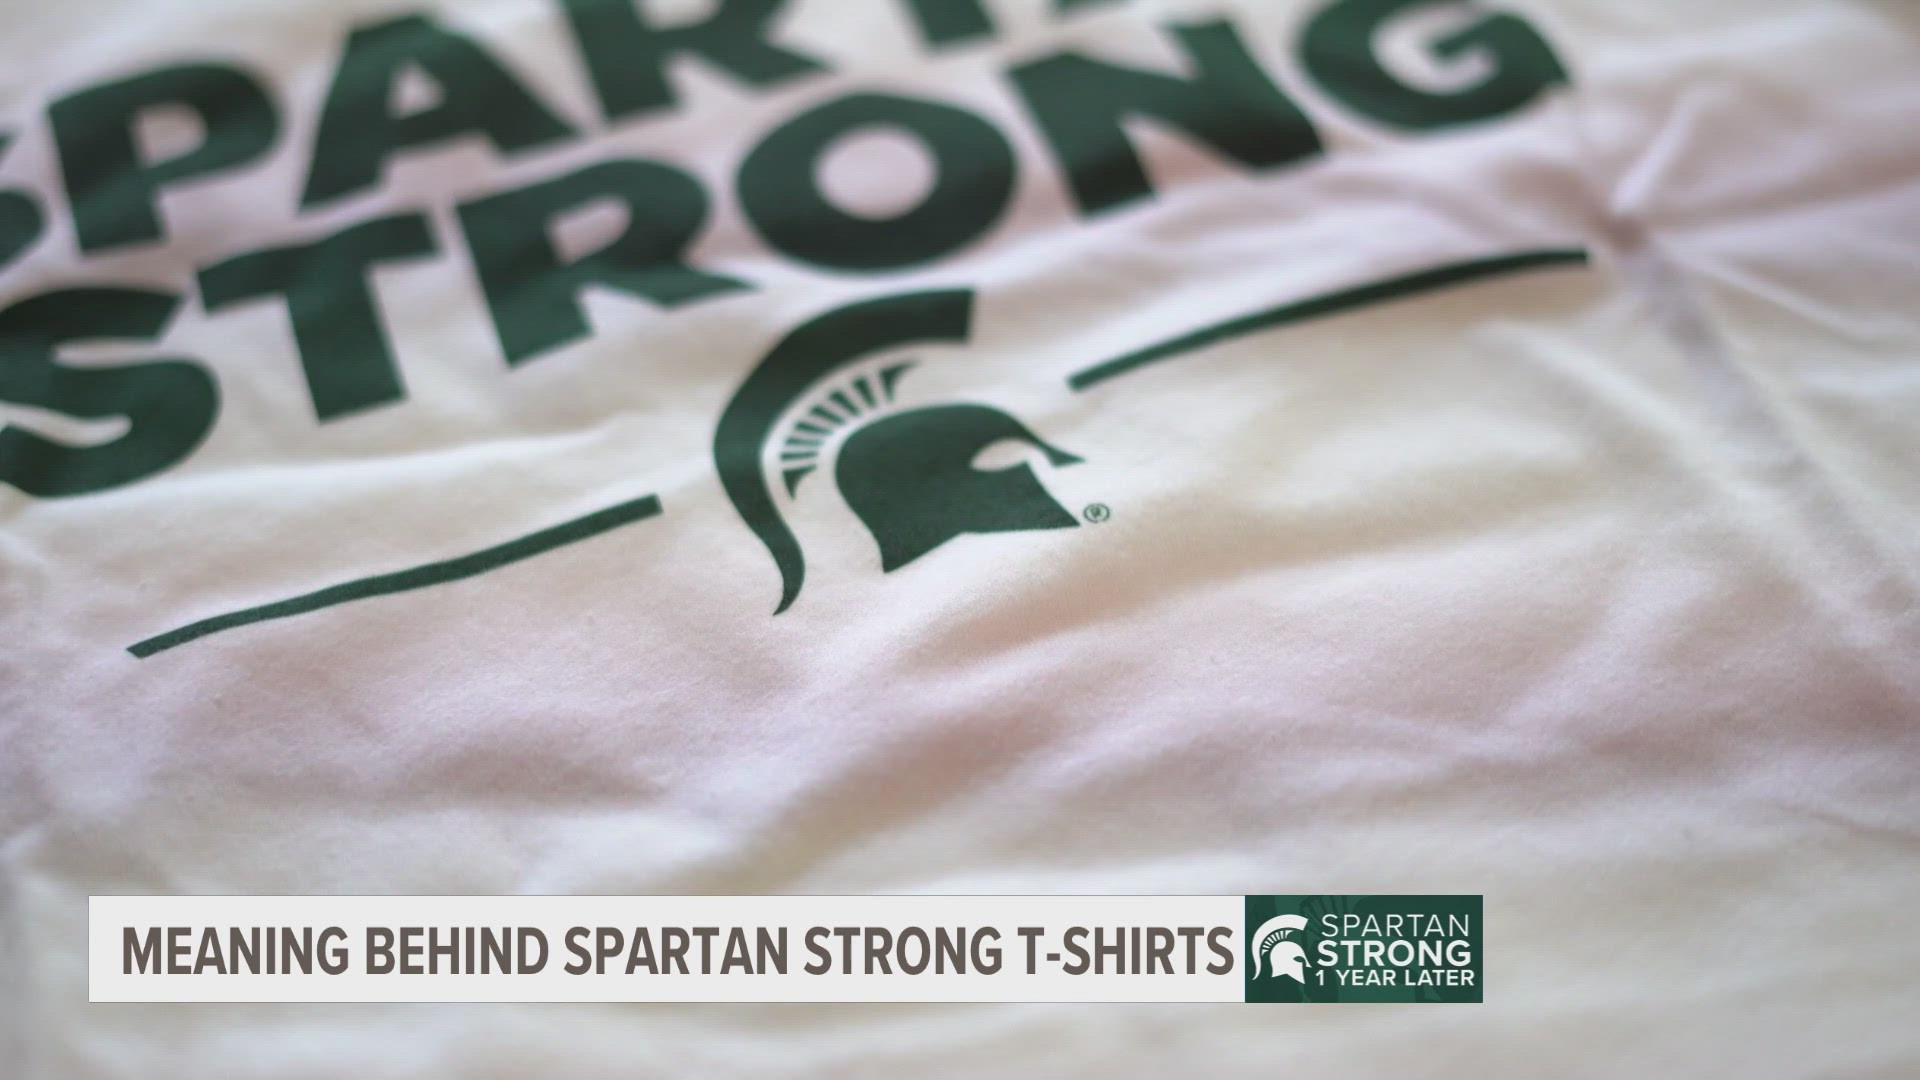 The shirts were originally produced to raise money for the shooting victims and show support to the Michigan State community.